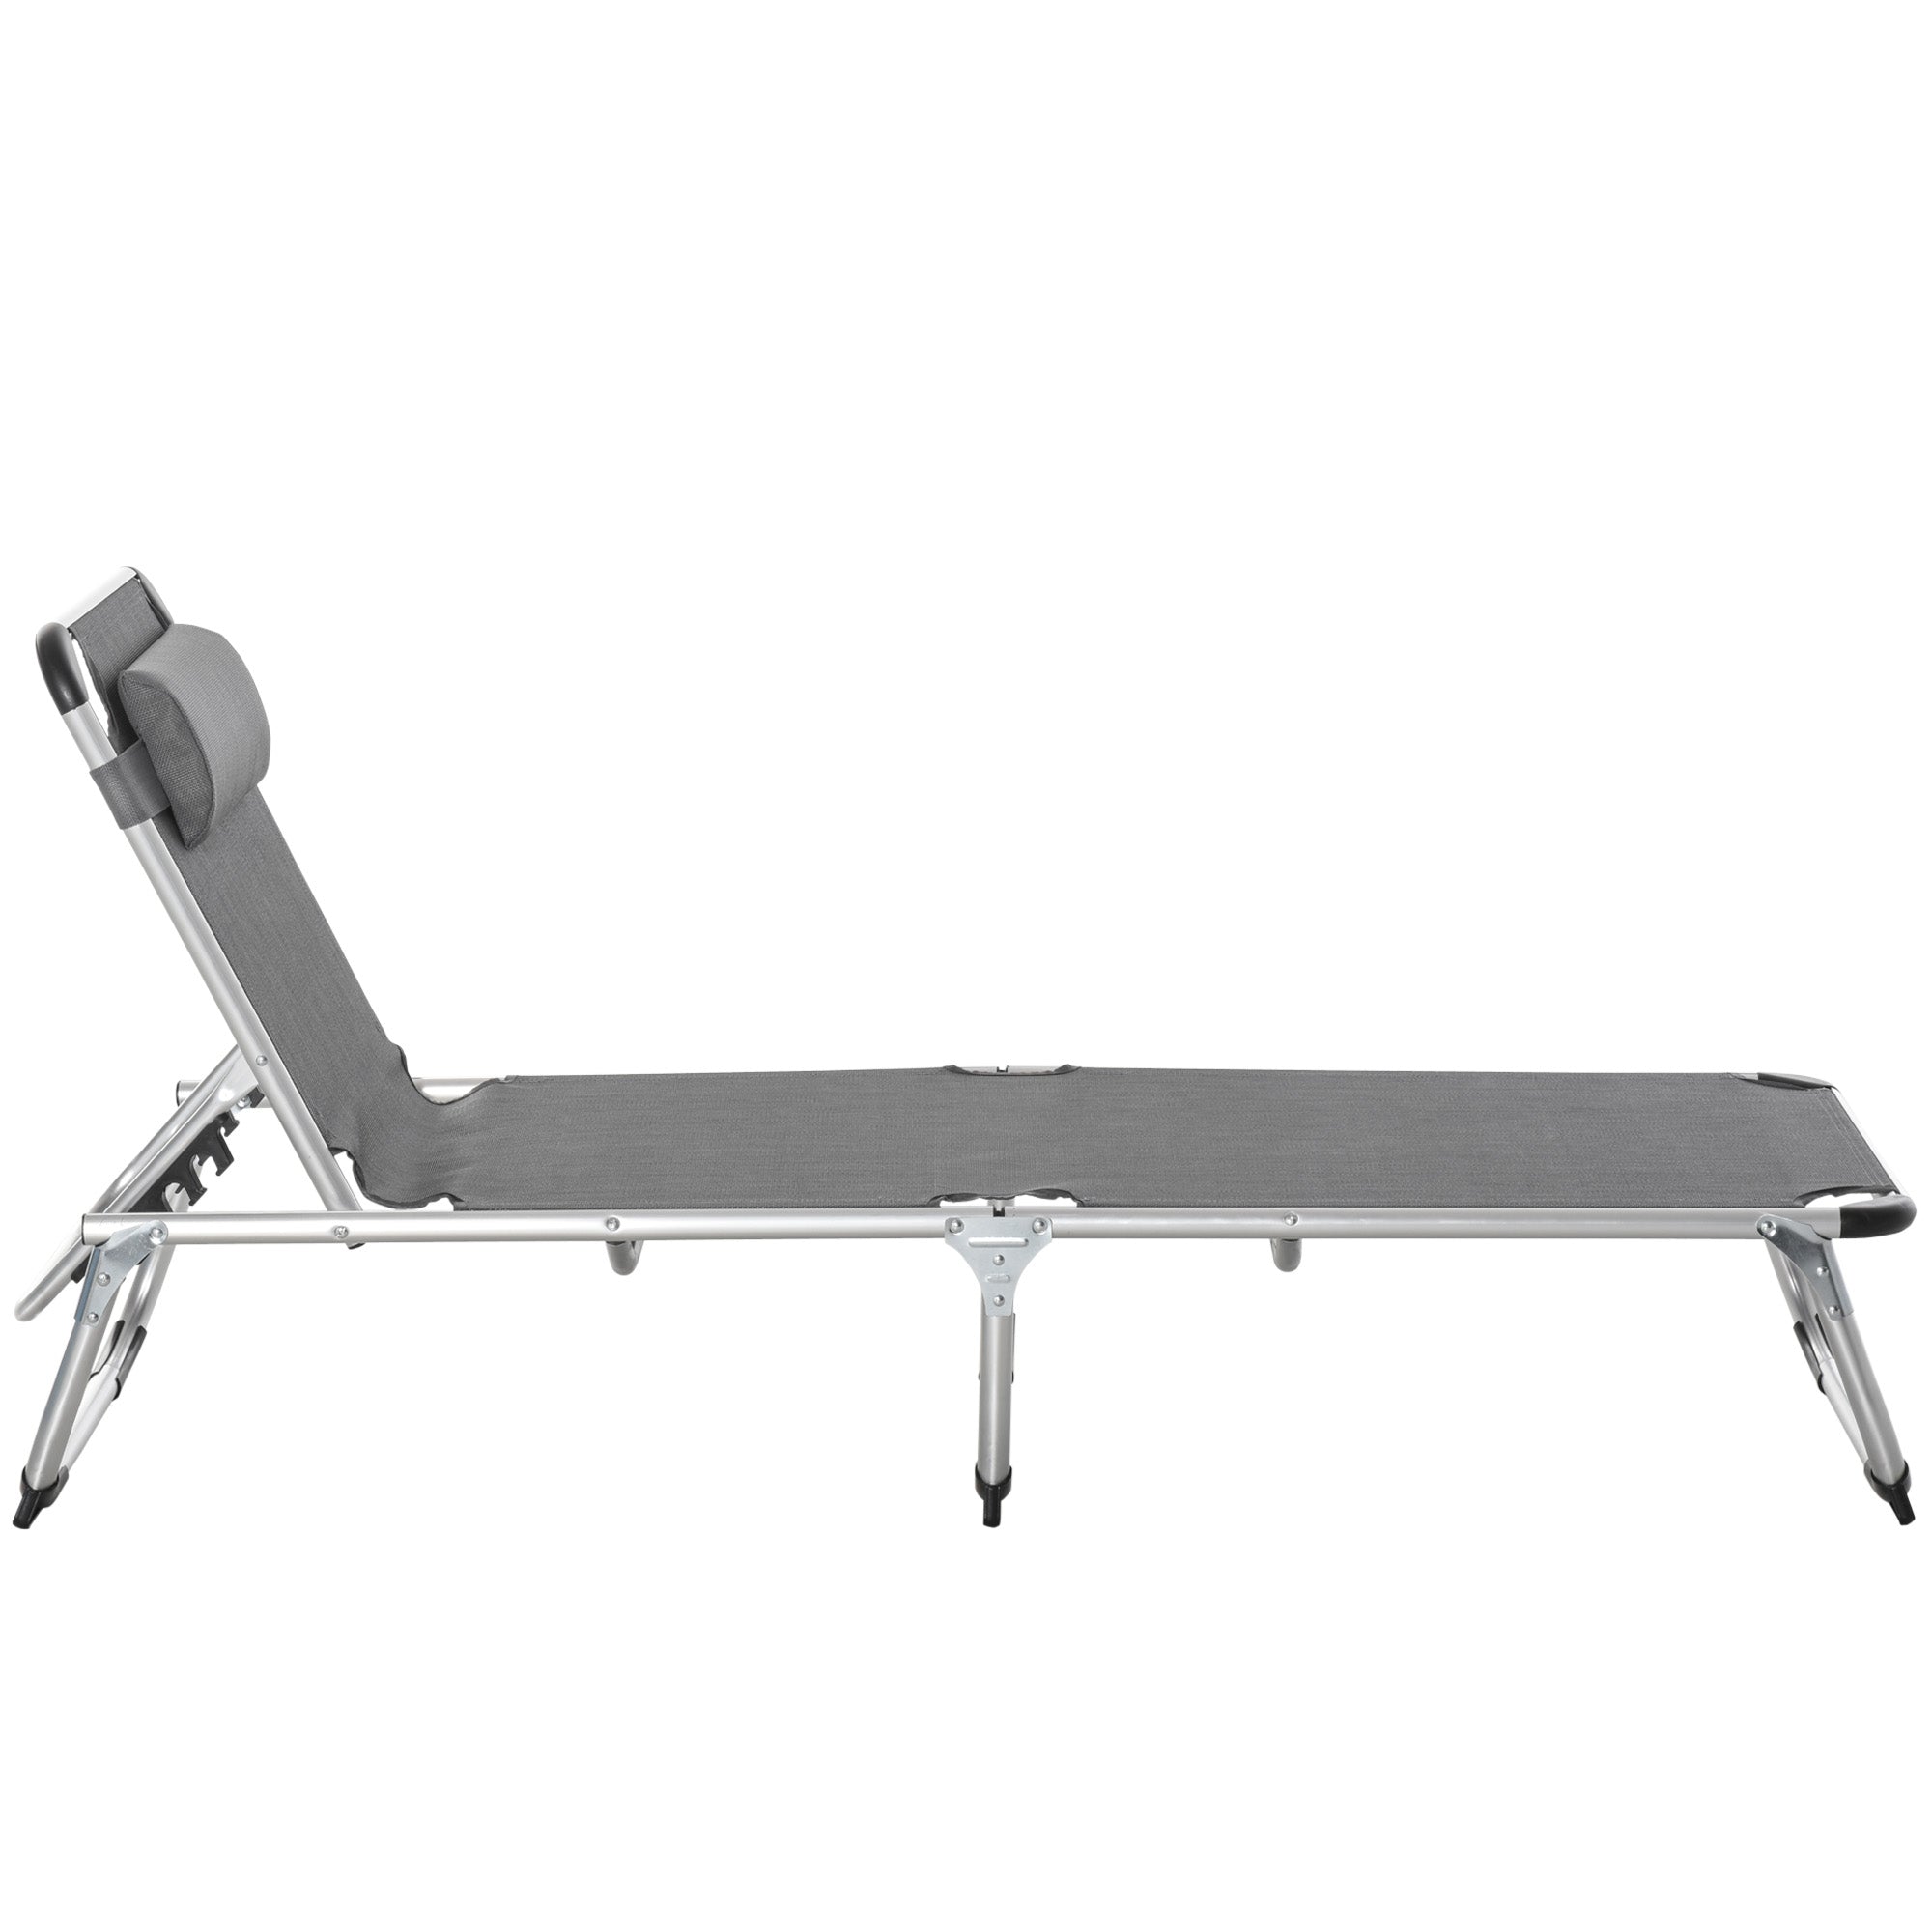 Outsunny Foldable Reclining Sun Lounger Lounge Chair Camping Bed Cot with Pillow 5-Level Adjustable Back Aluminium Frame Grey - Inspirely